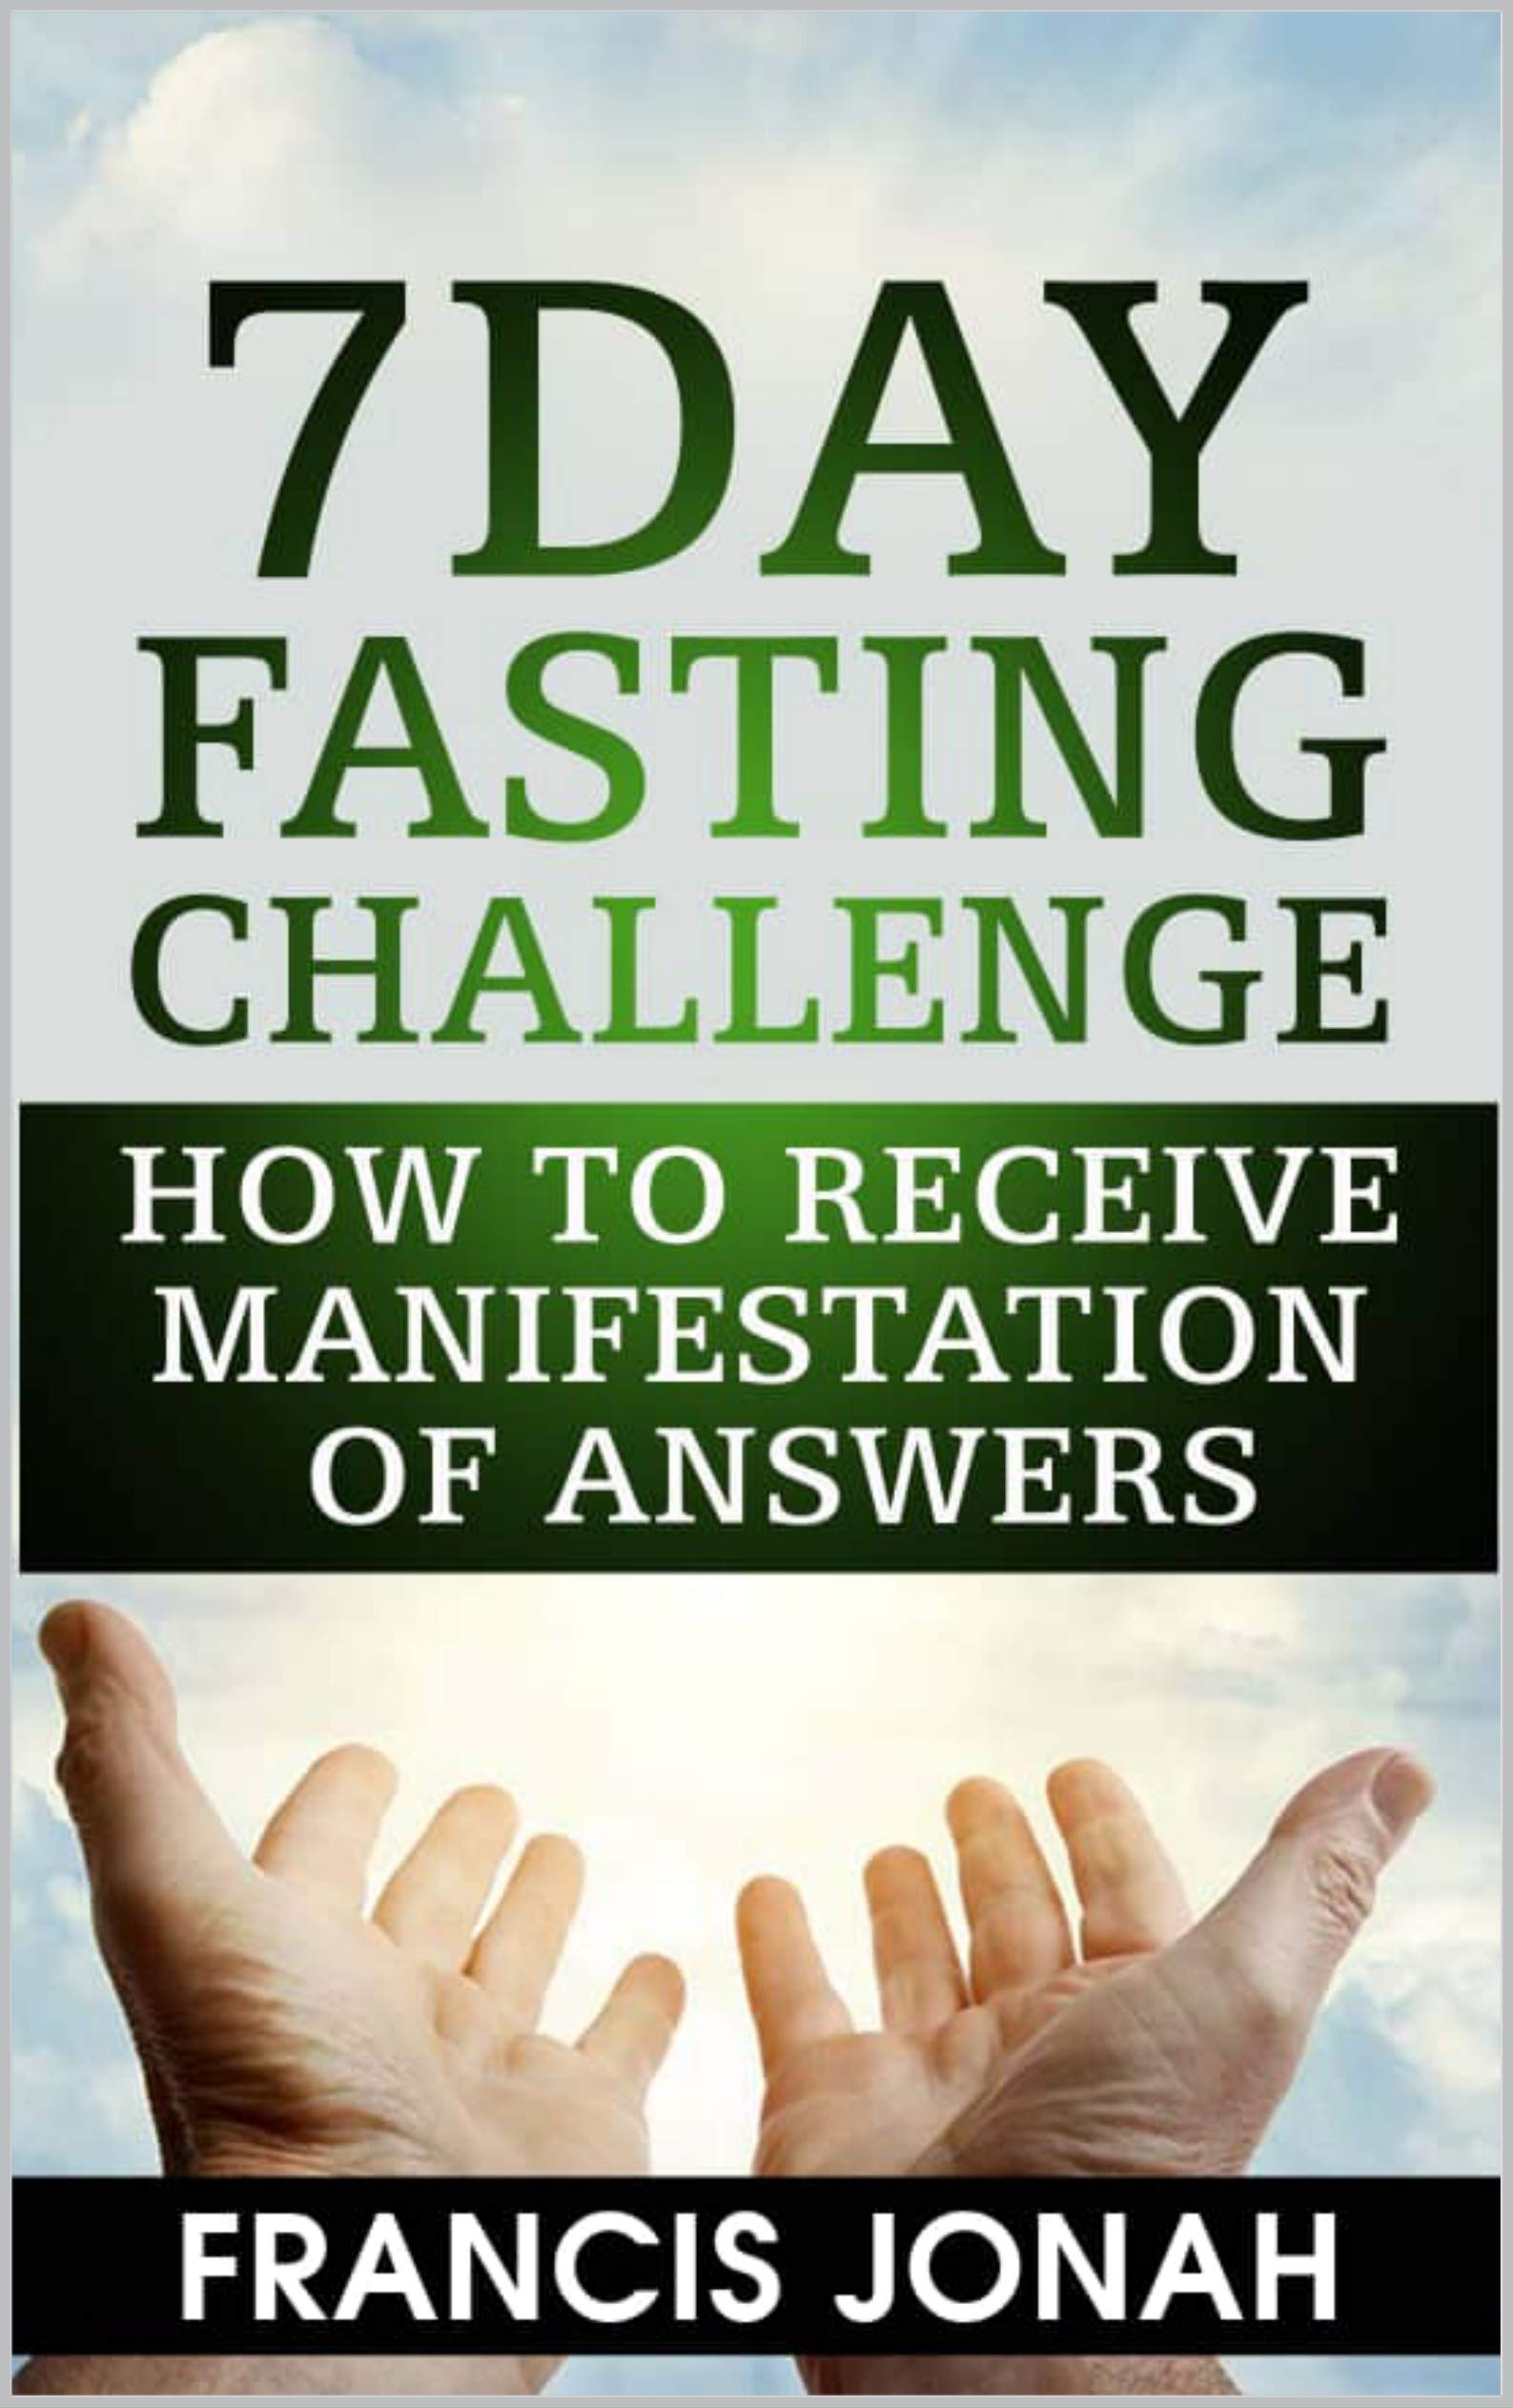 Book Cover 7 Day Fasting Challenge: 7 Day Fast: How to Receive Manifestation of Answers (Fasting Challenges Book 2)